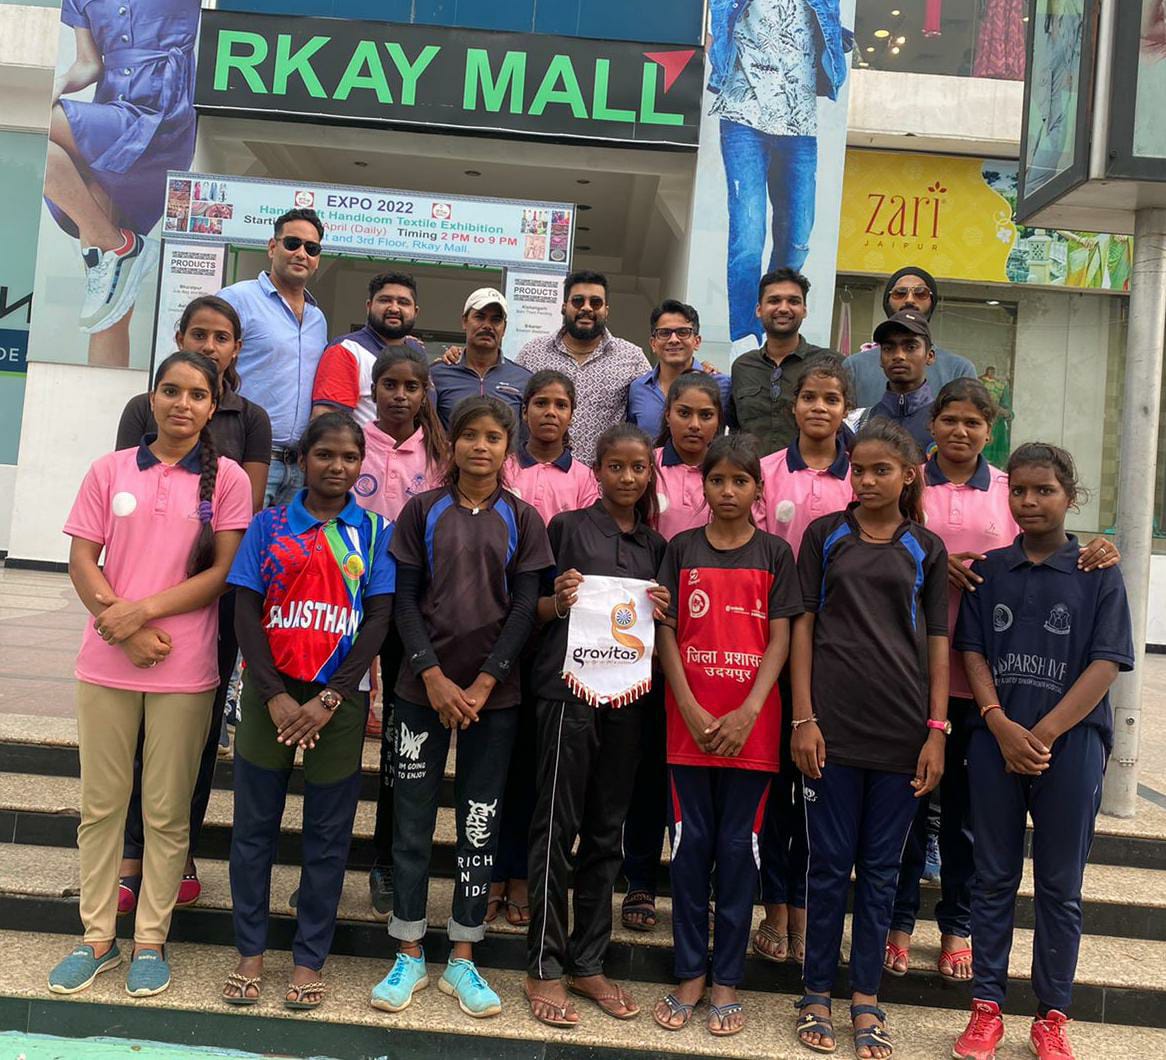 Financial assistance was given to two girls of tennis ball cricket